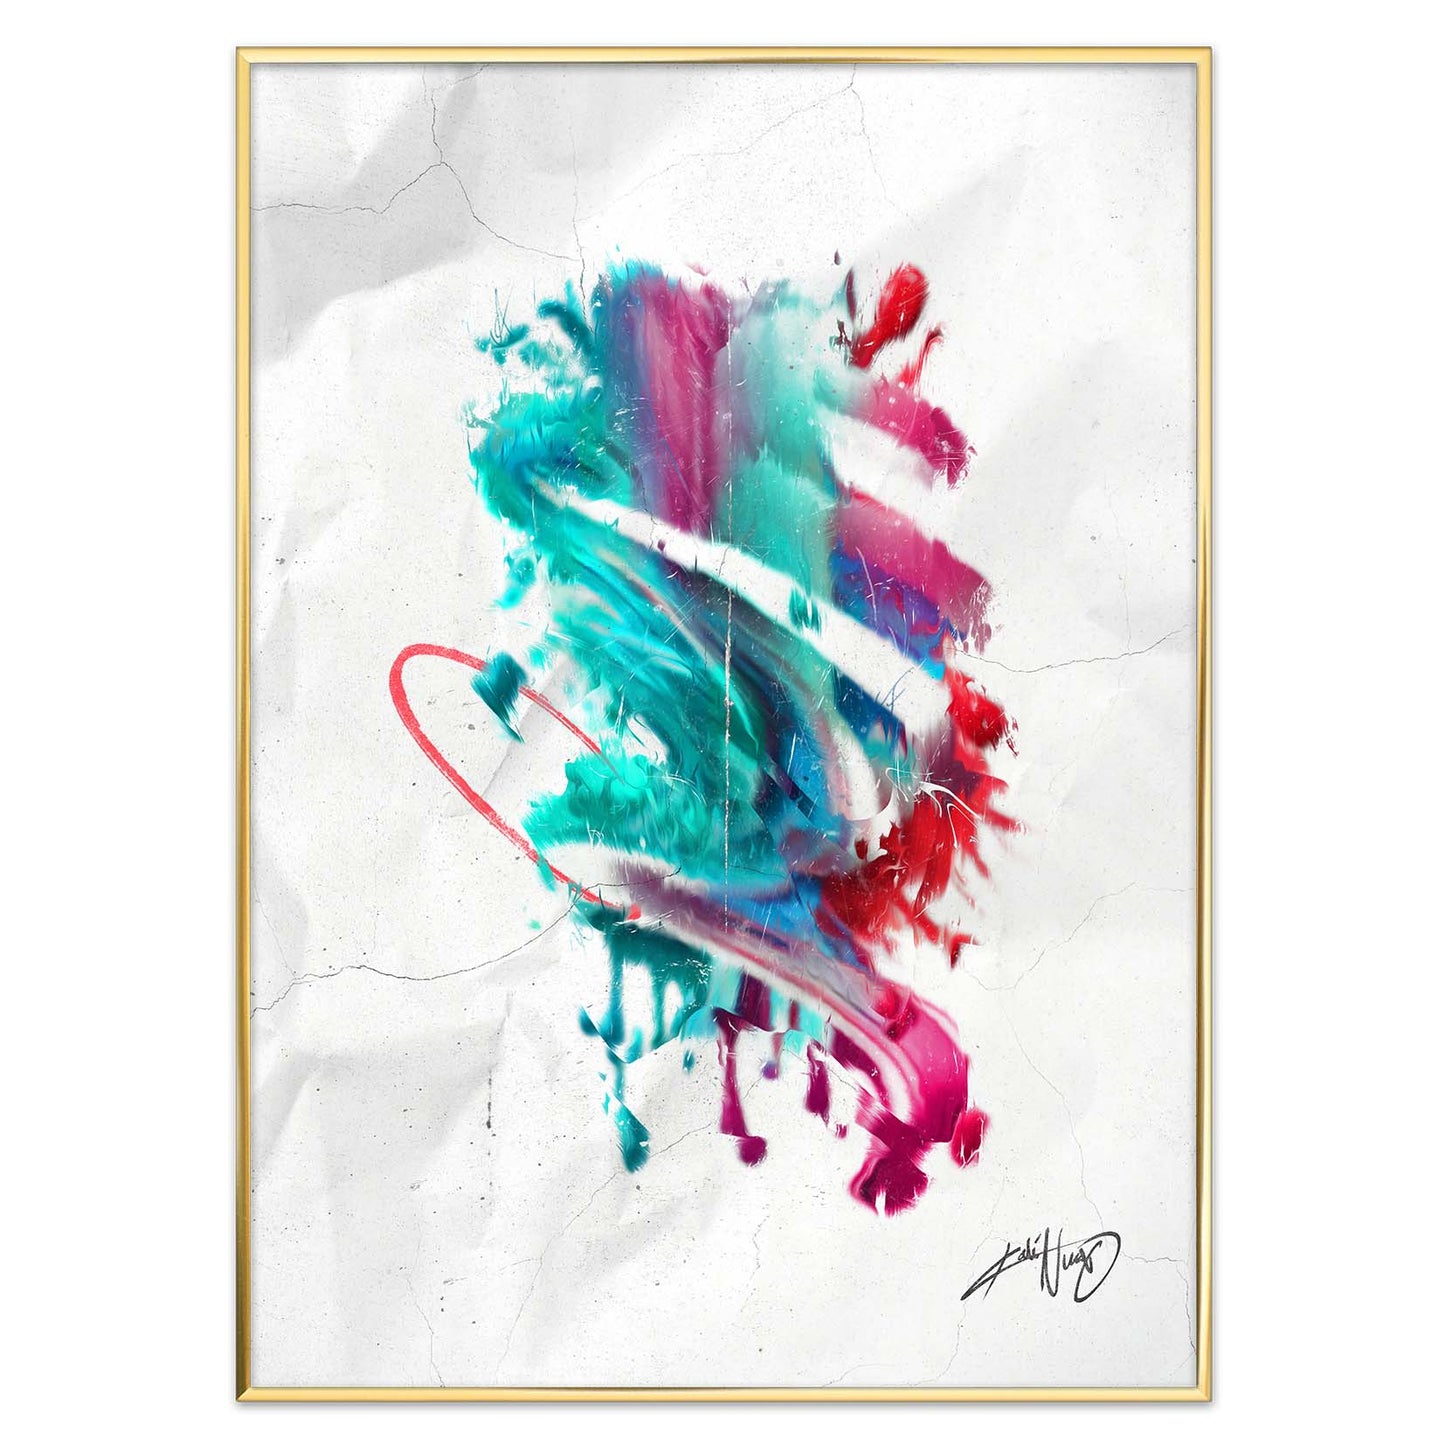 colorful calligraphy abstract art poster in a golden brass frame on a white background